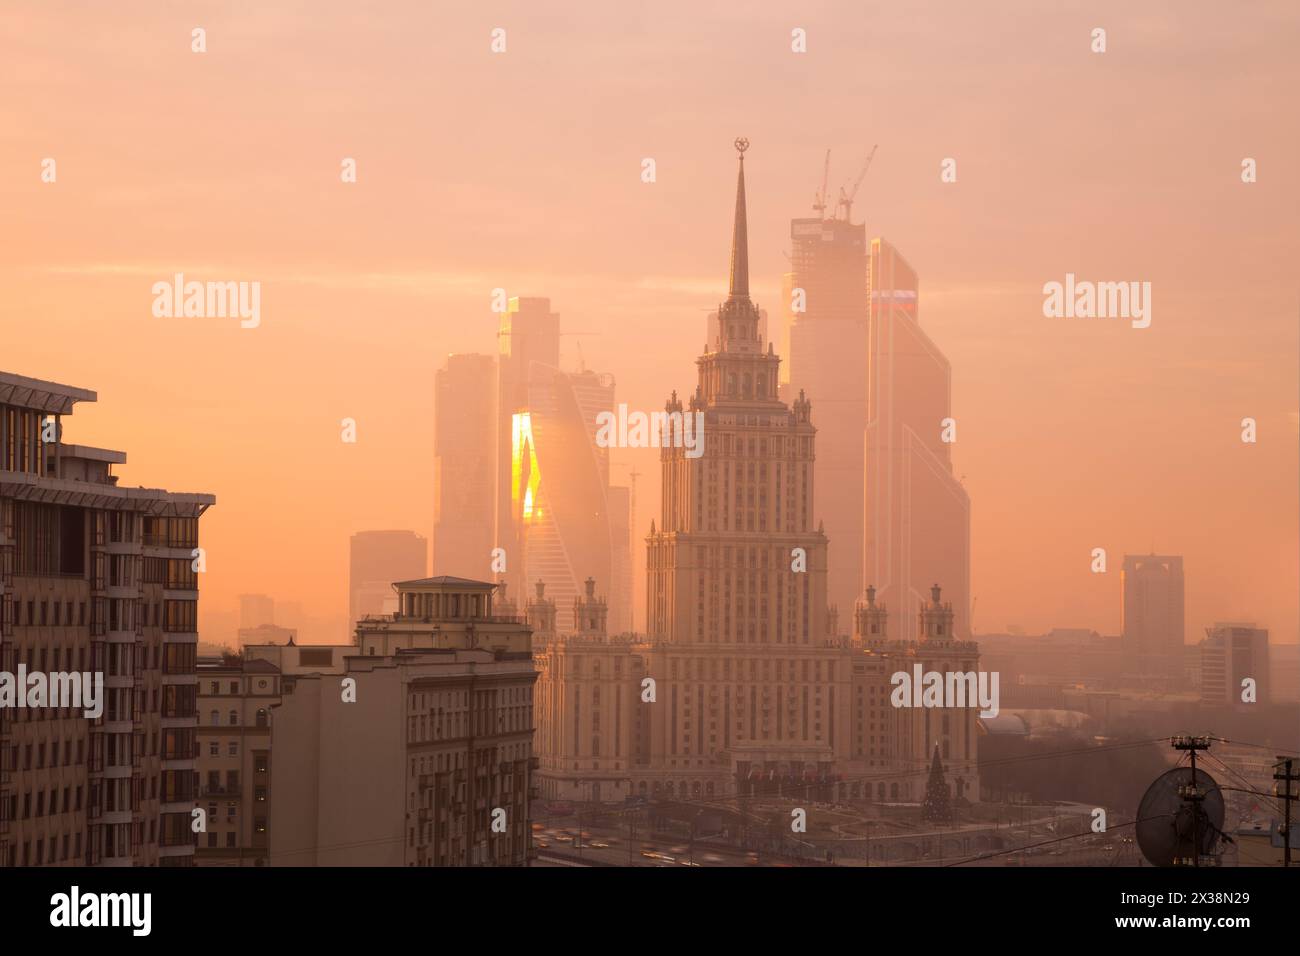 MOSCOW - NOV 29, 2014: Ukraine hotel (Stalin skyscraper) and Moscow International Business Center skyscrapers in fog at morning Stock Photo